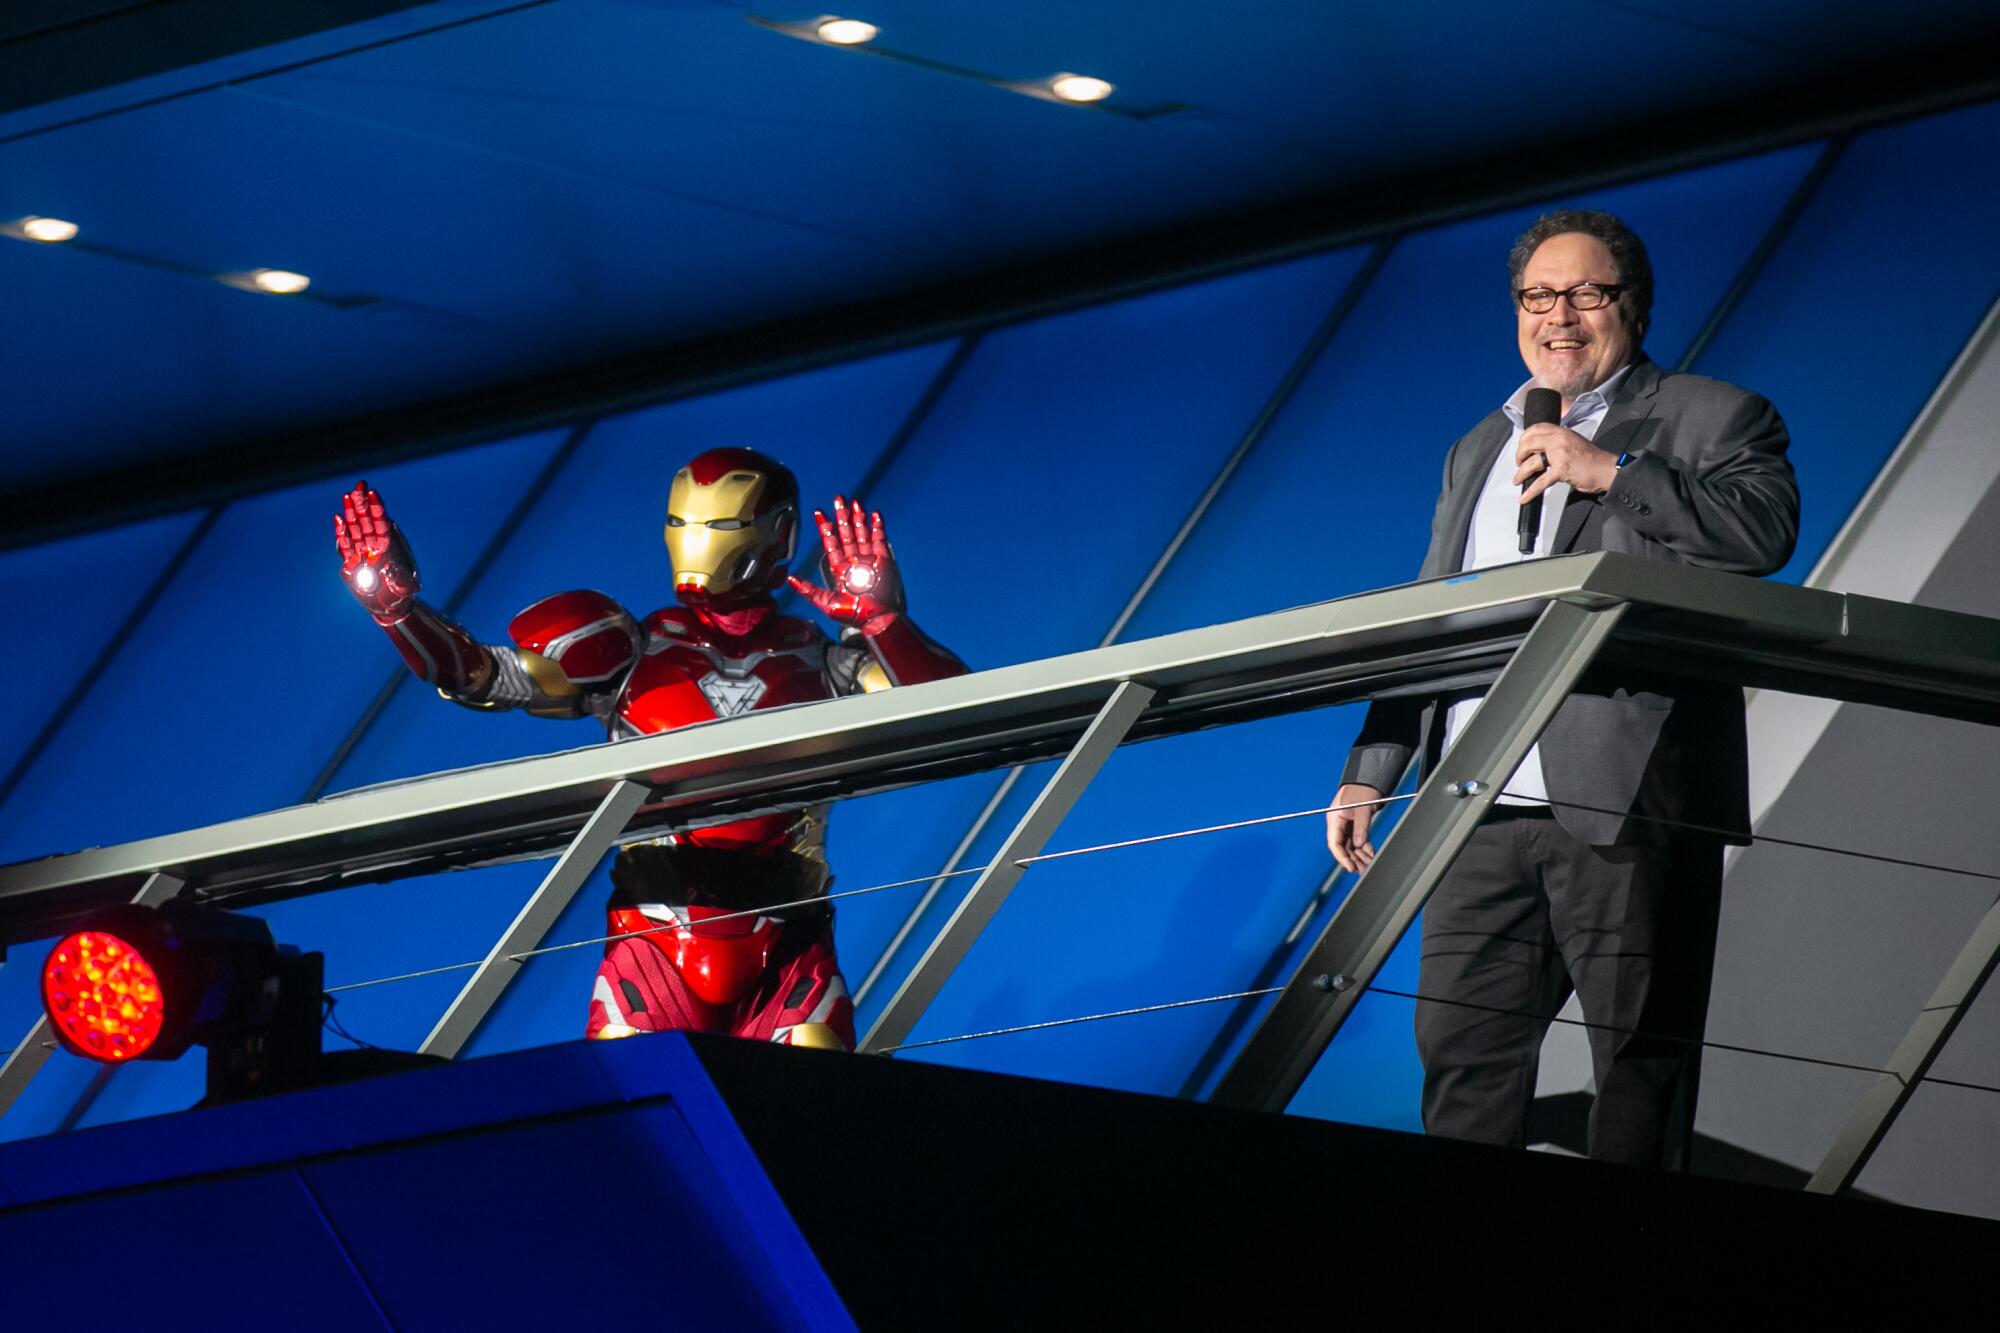 Iron Man holds up his hands onstage as Jon Favreau speaks.